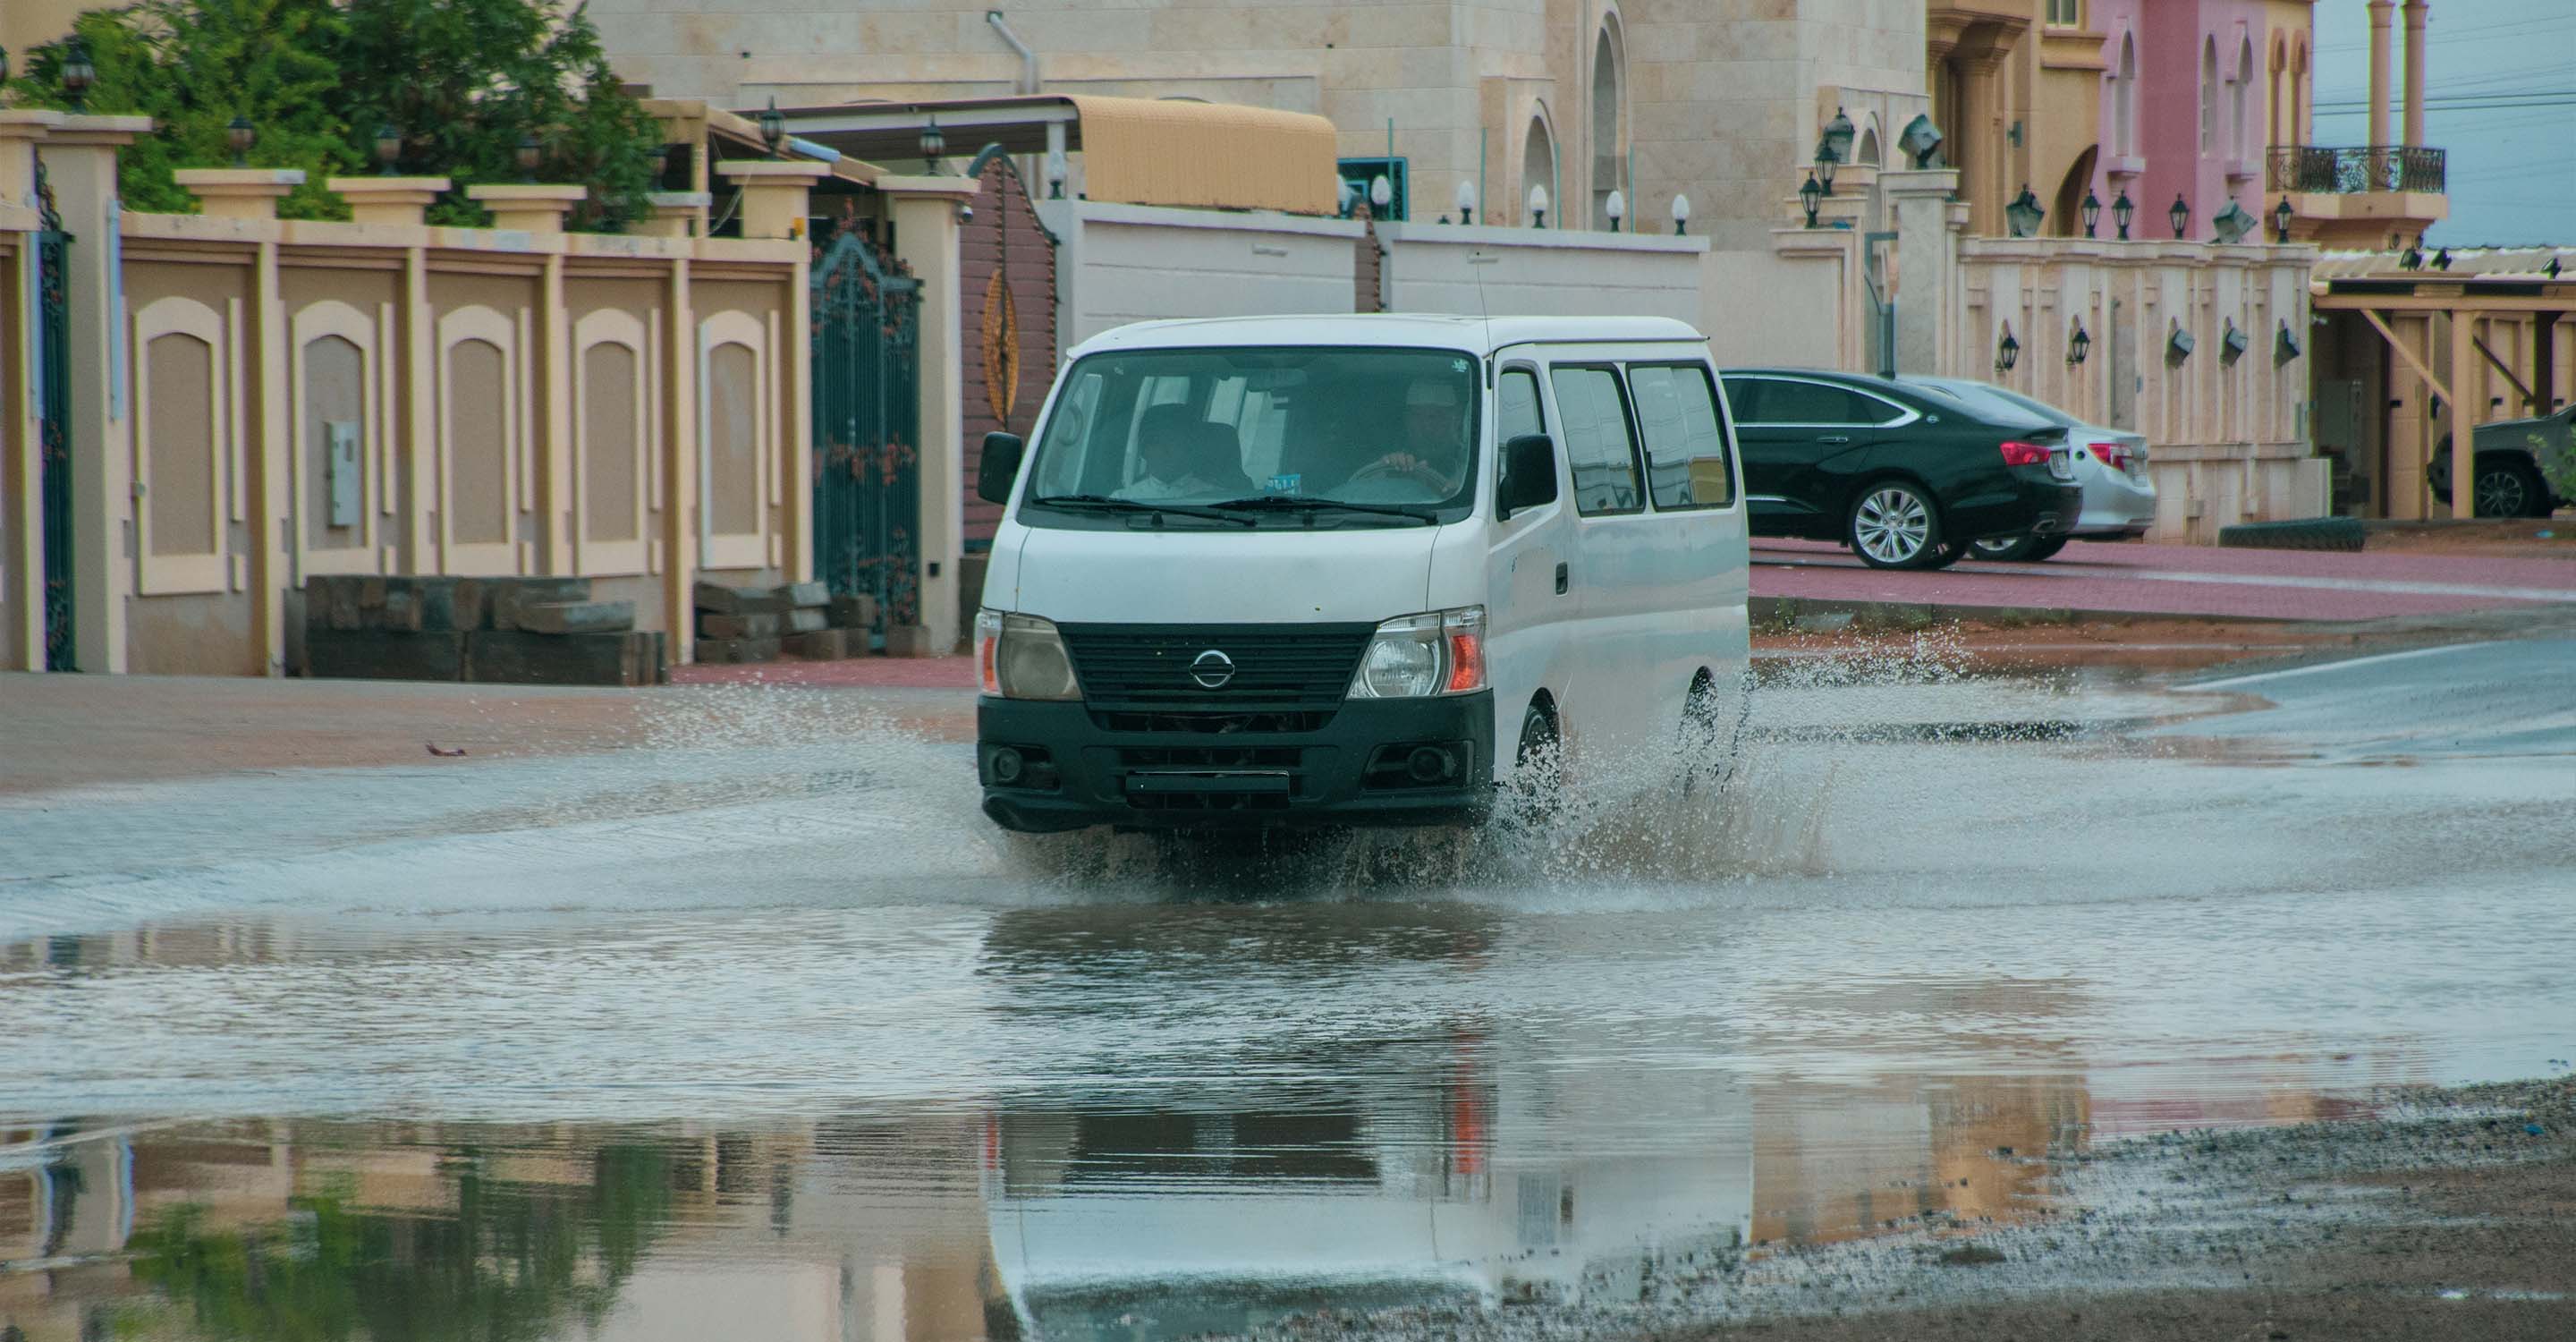 The thumbnail of a news article titled Indoor Air Quality Alert: Dubai Flooding